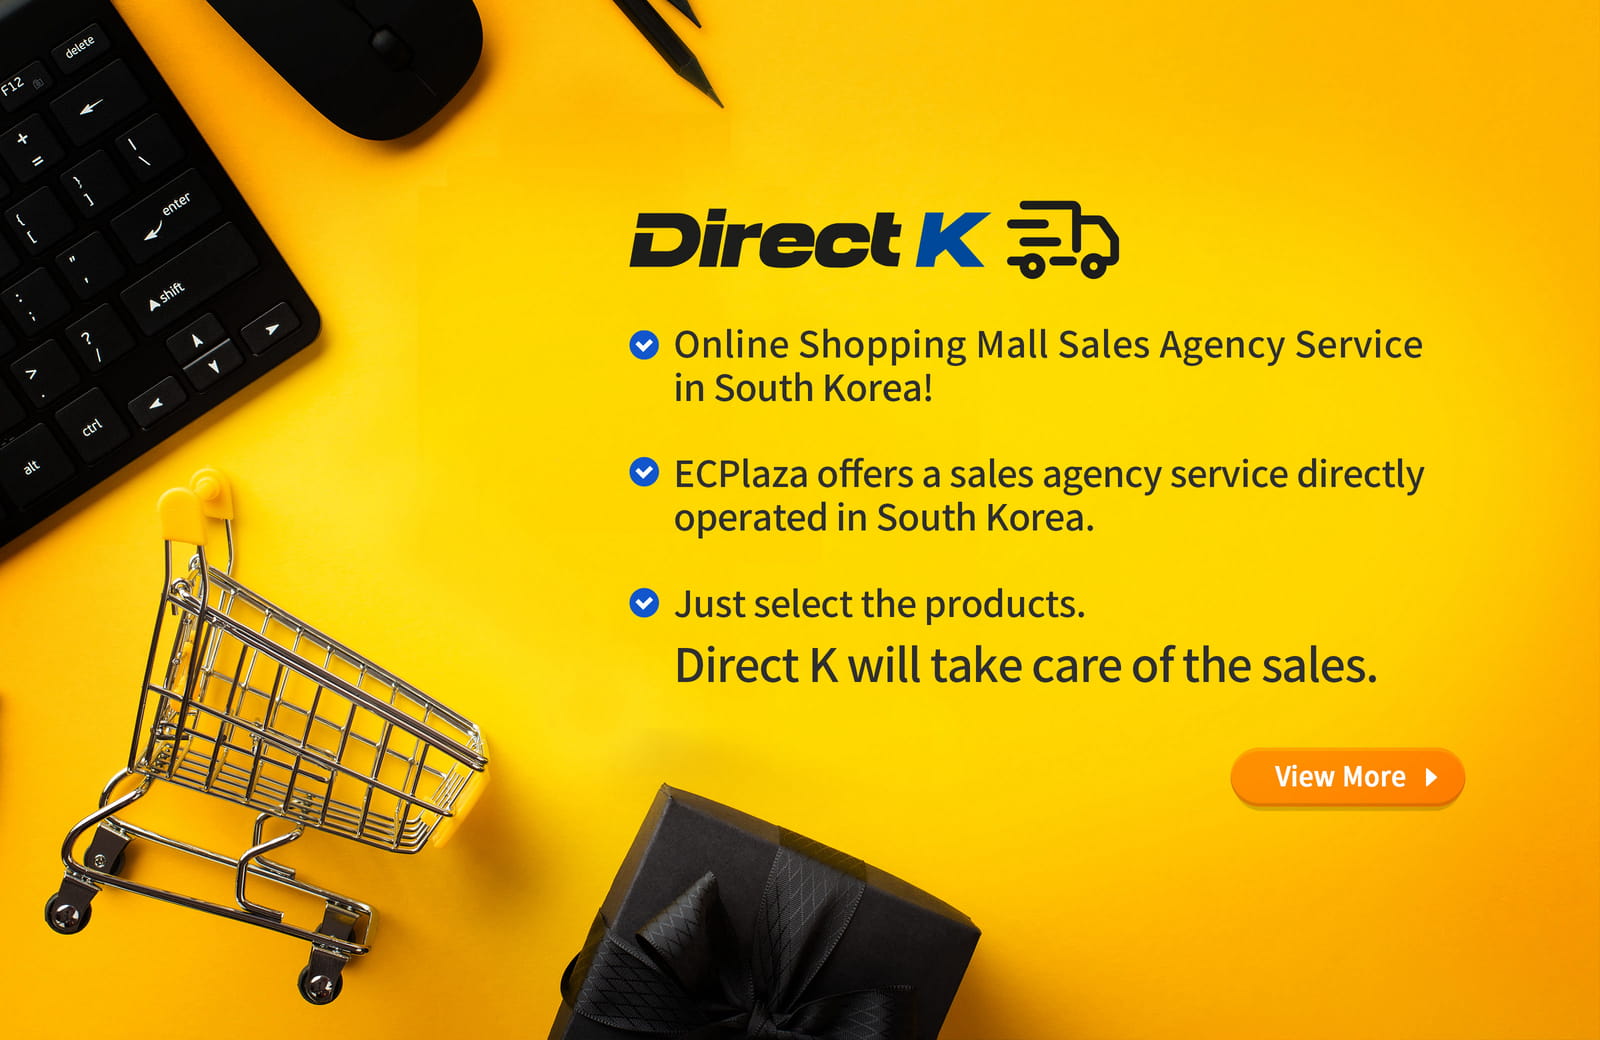 Direct K online shopping mall sales agency service